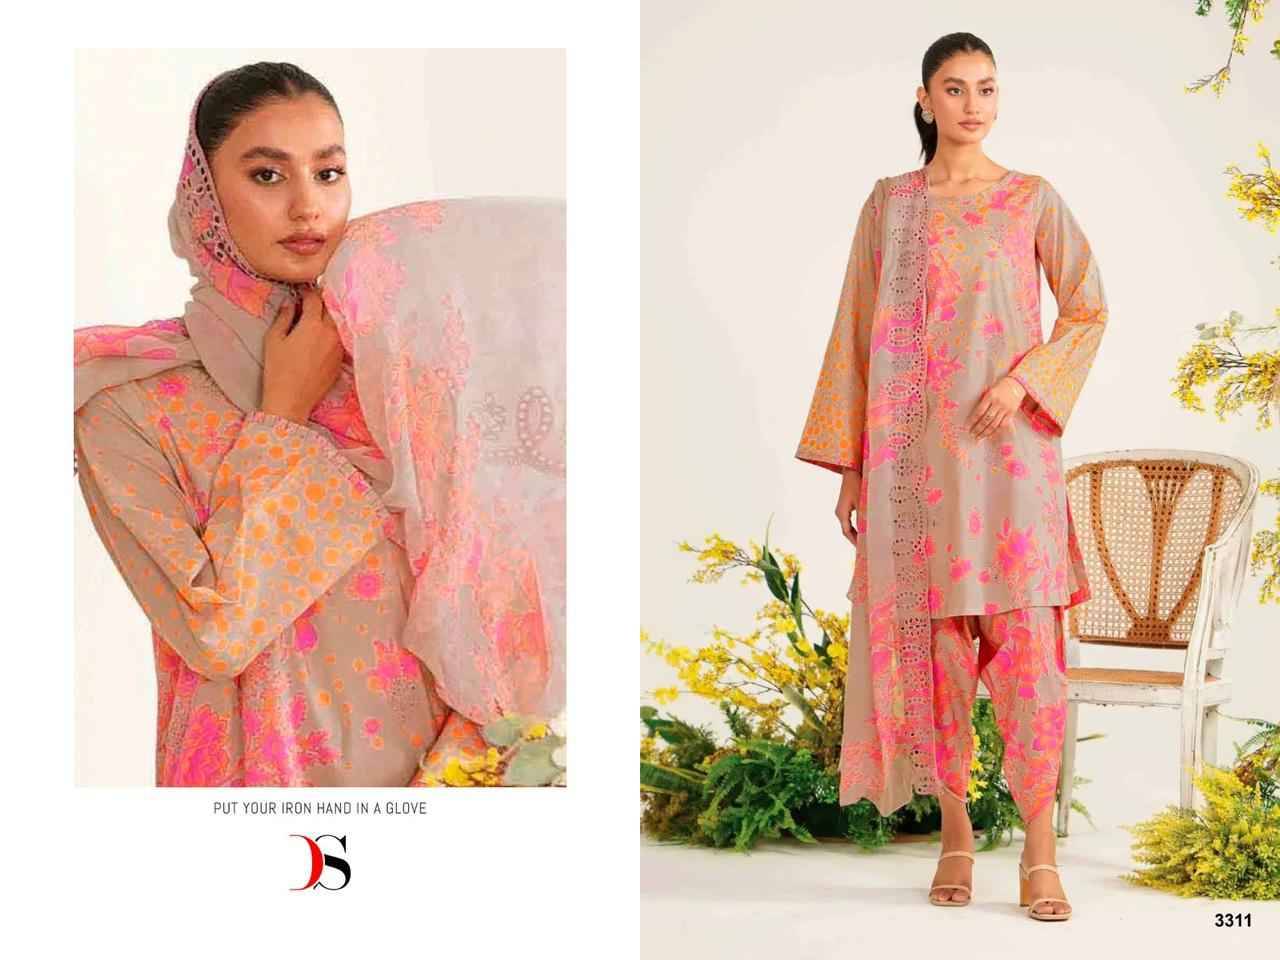 Charizma Rang E Bahar By Deepsy Suits 3311 To 3318 Series Pakistani Suits Collection Beautiful Stylish Fancy Colorful Party Wear & Occasional Wear Pure Pashmina Print Dresses At Wholesale Price